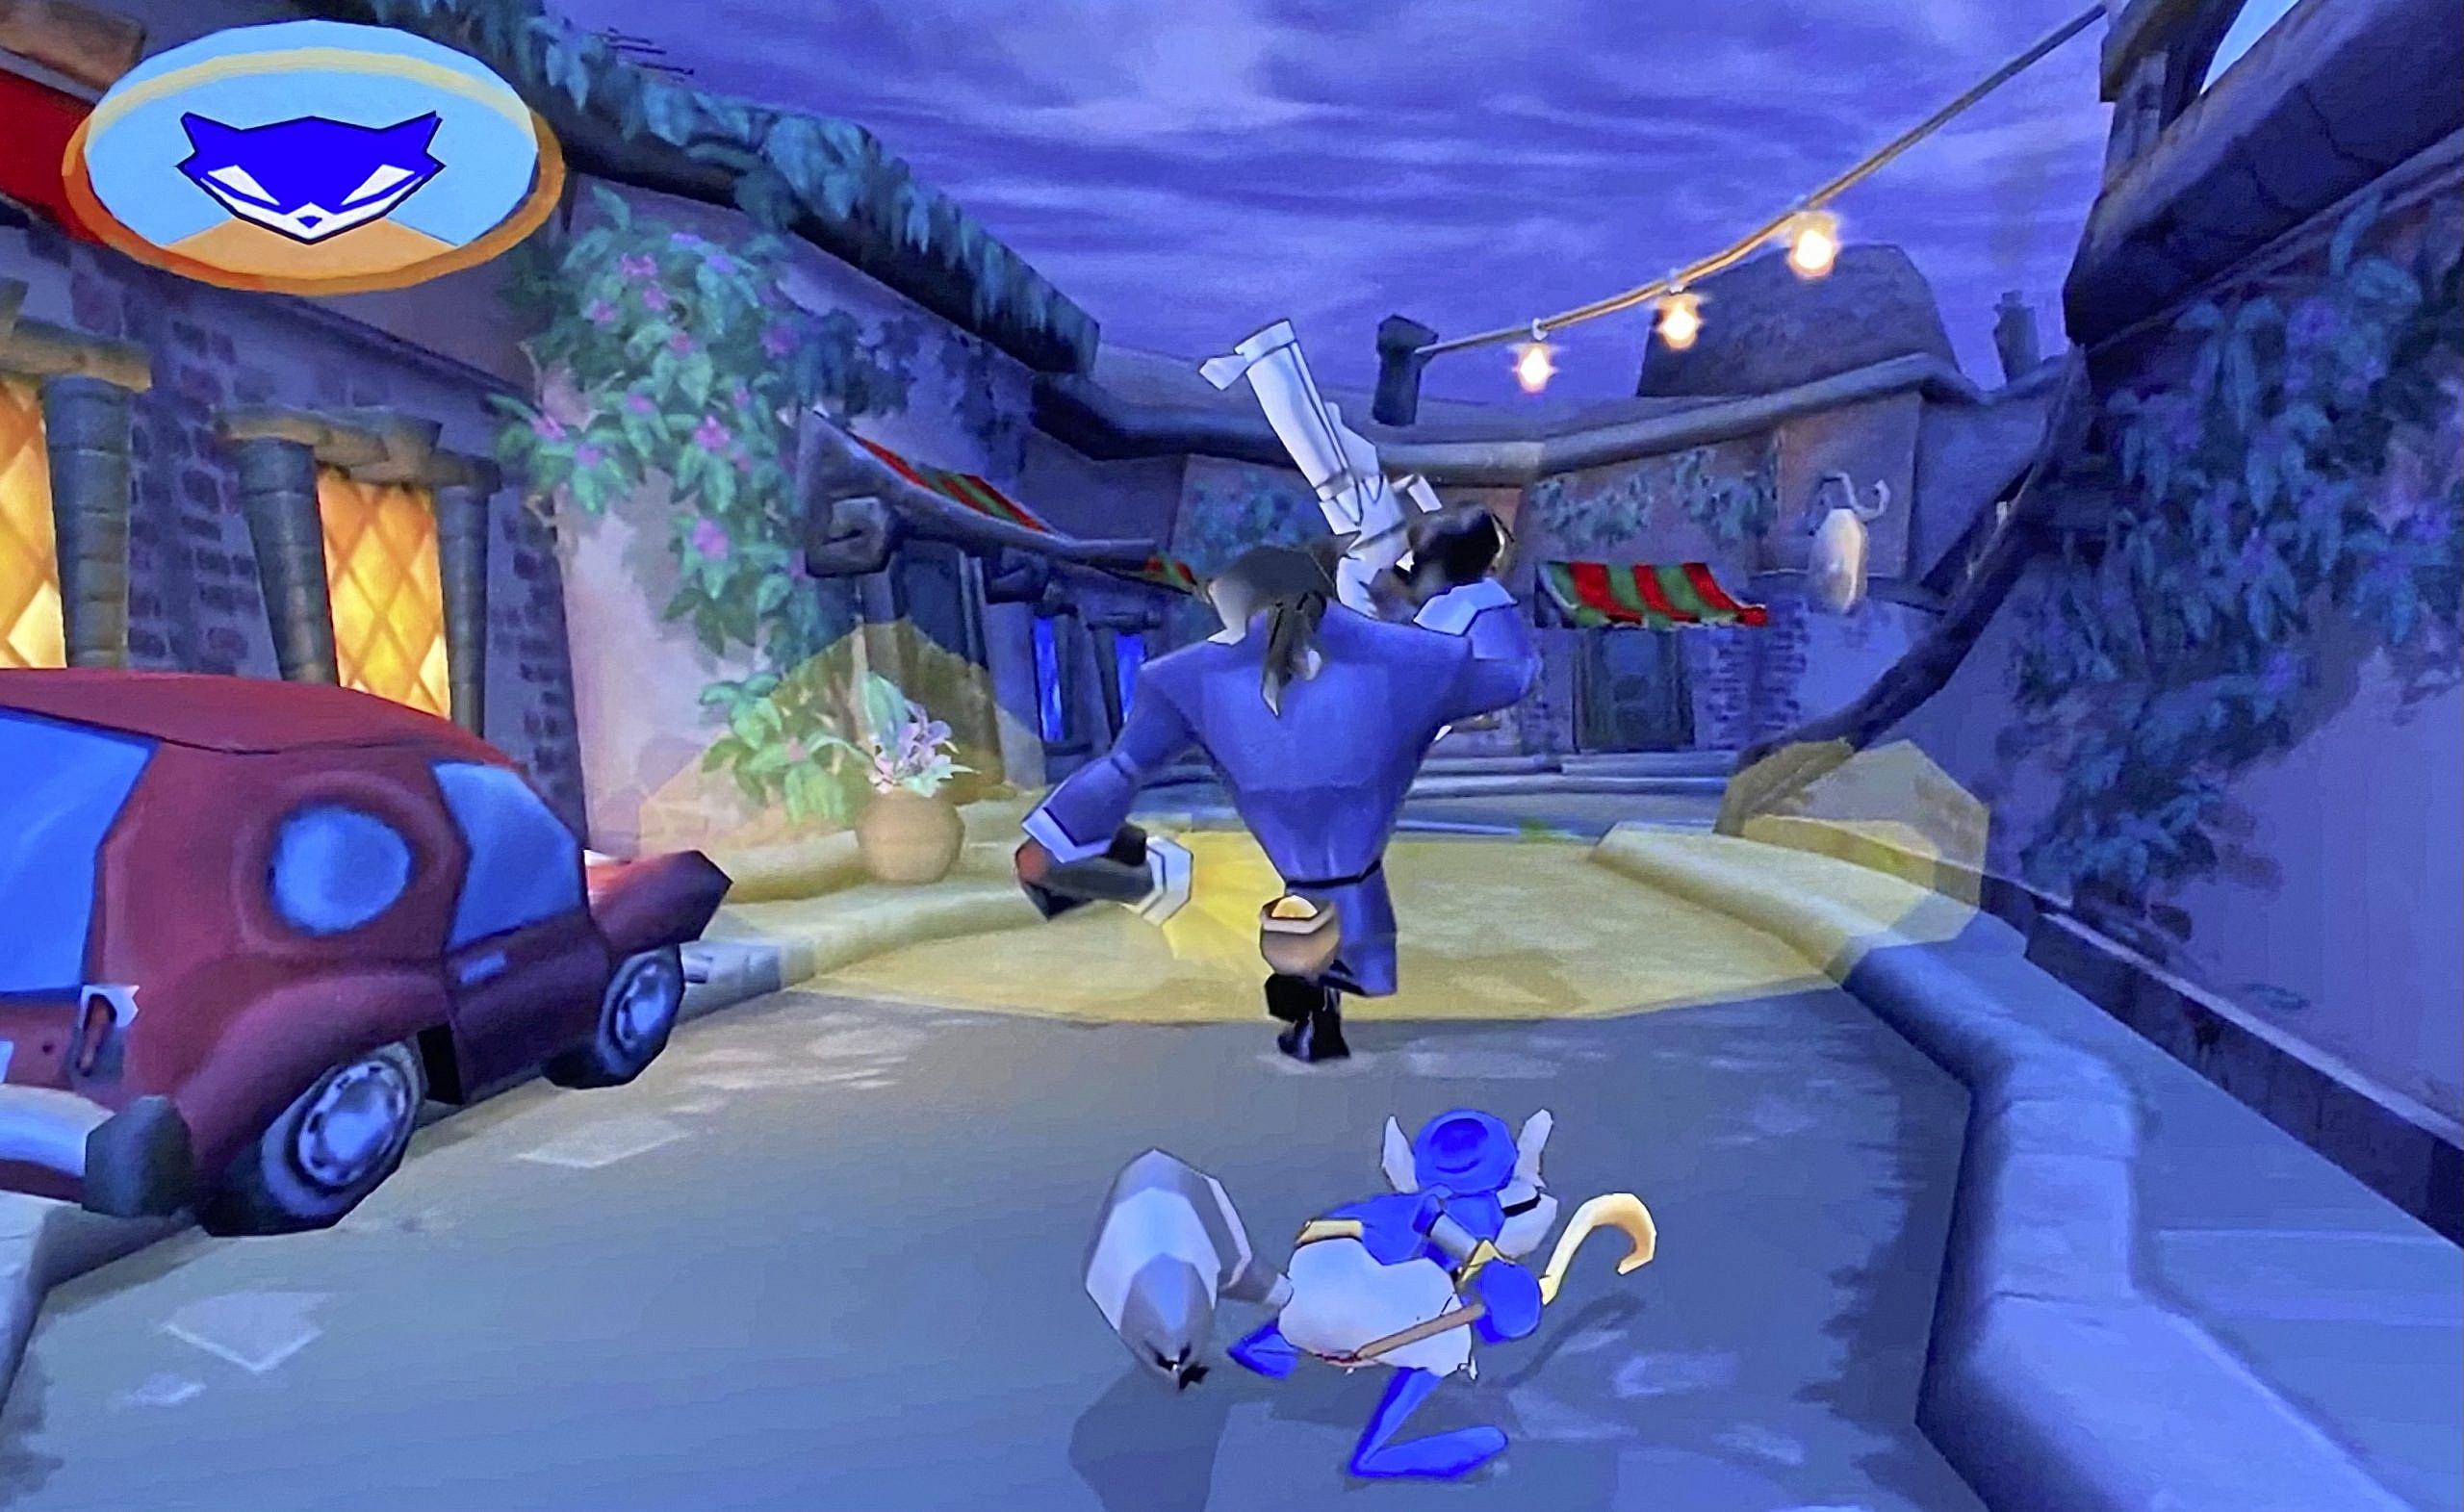 Sly Cooper 2